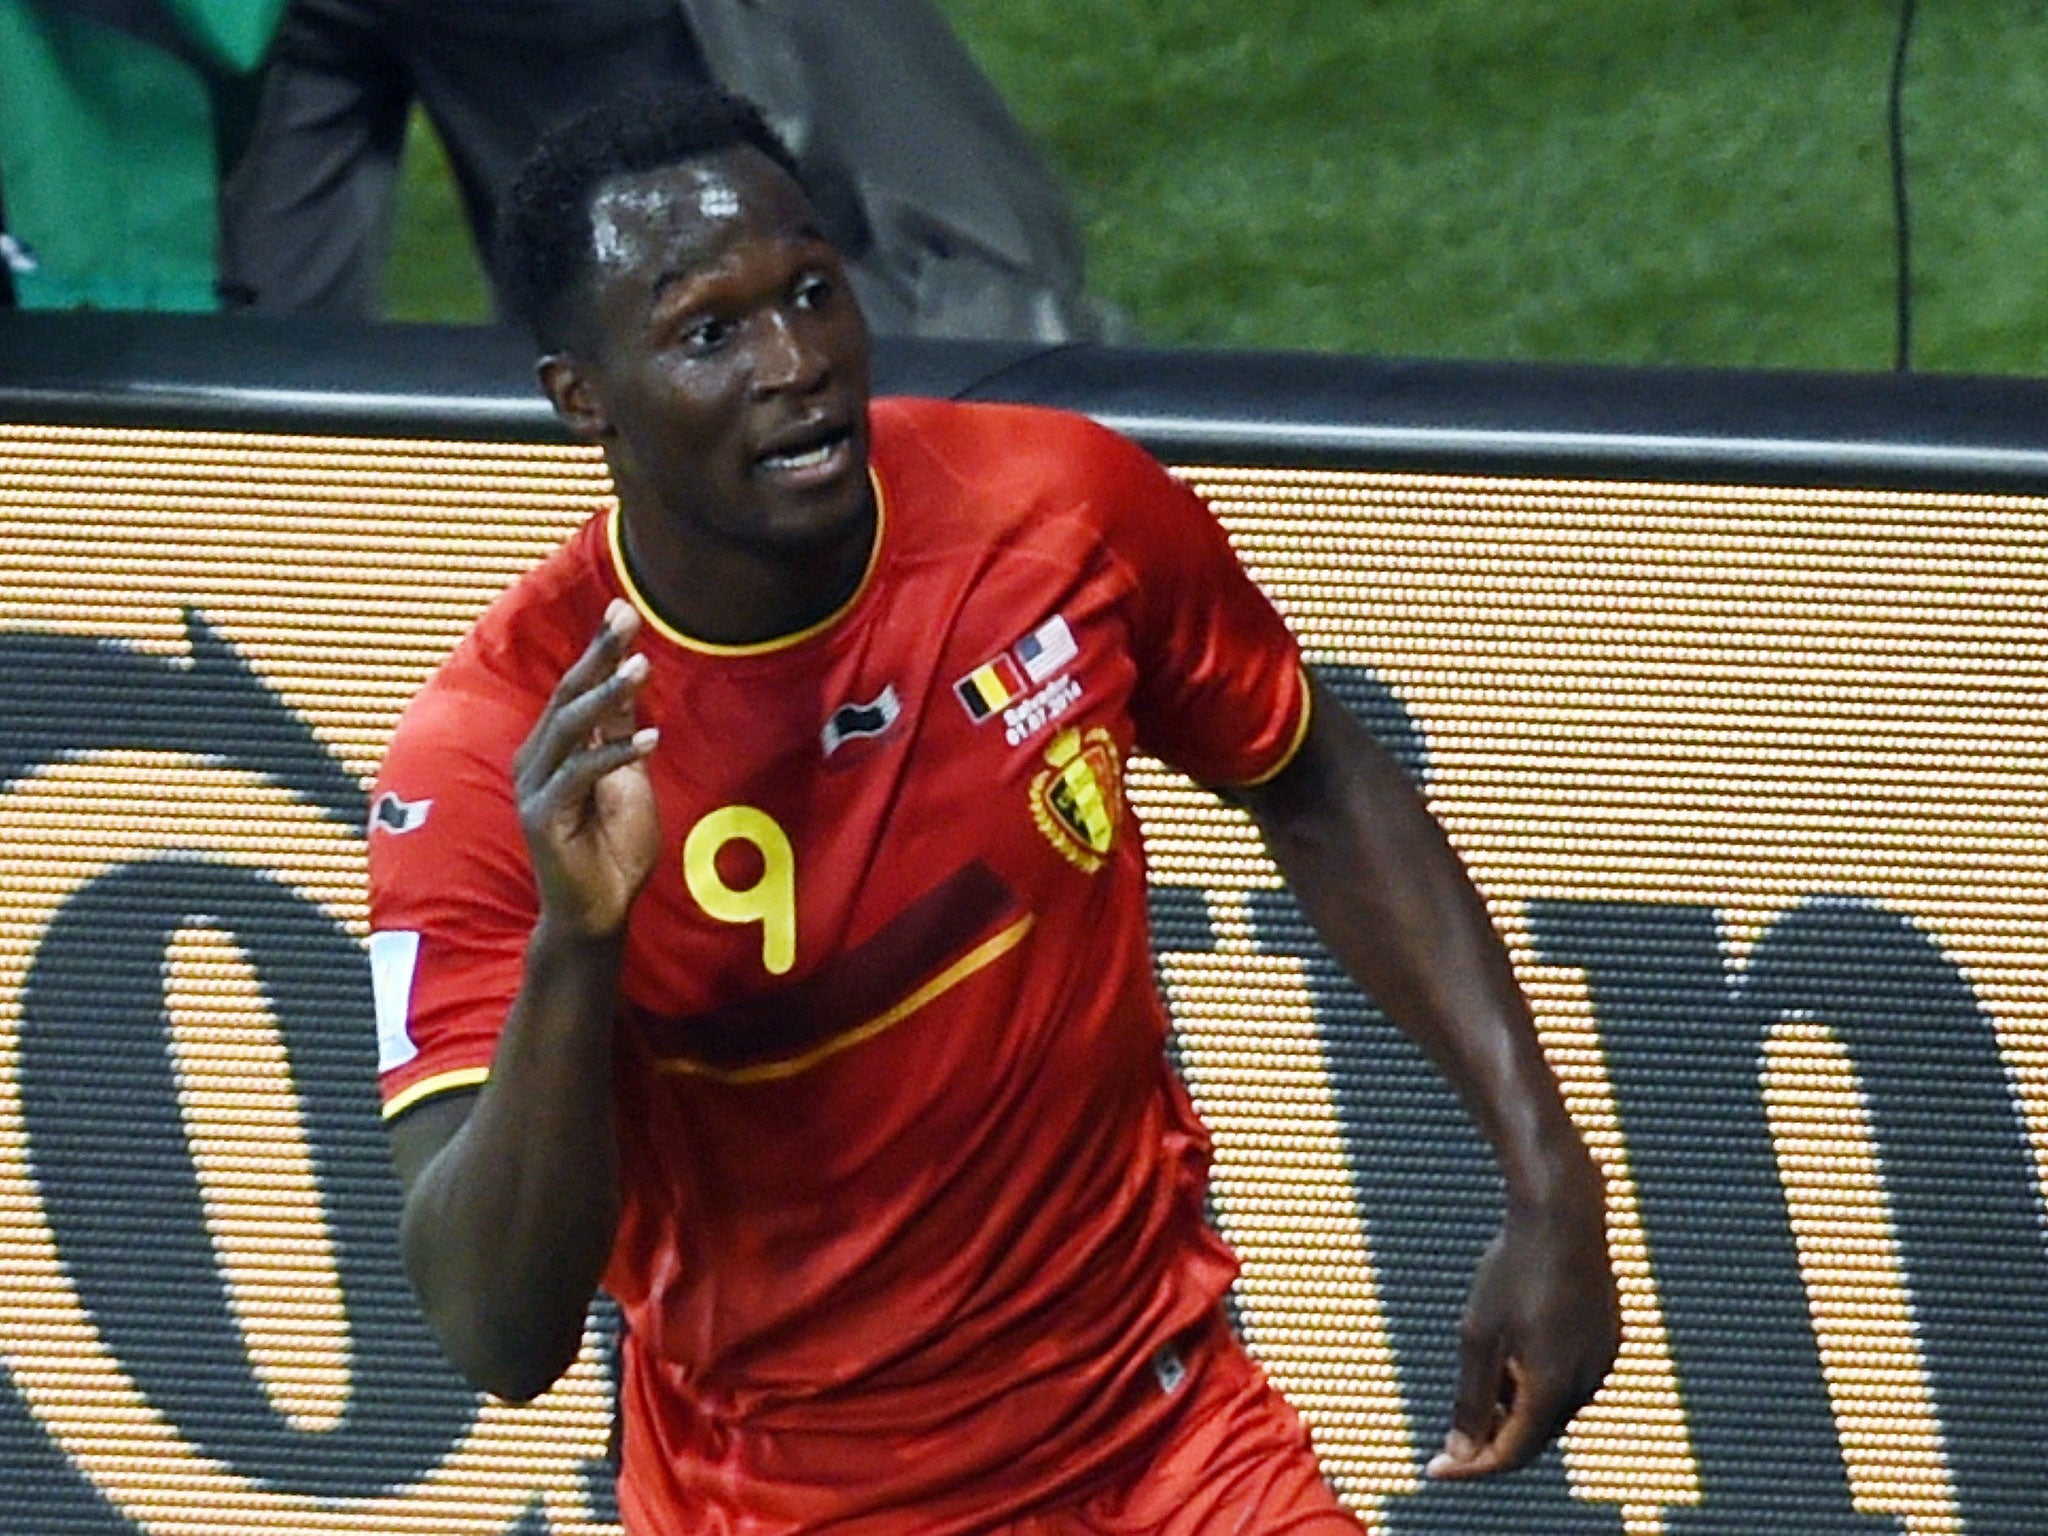 Romelu Lukaku is moving to Atletico Madrid on loan, according to reports in Spain